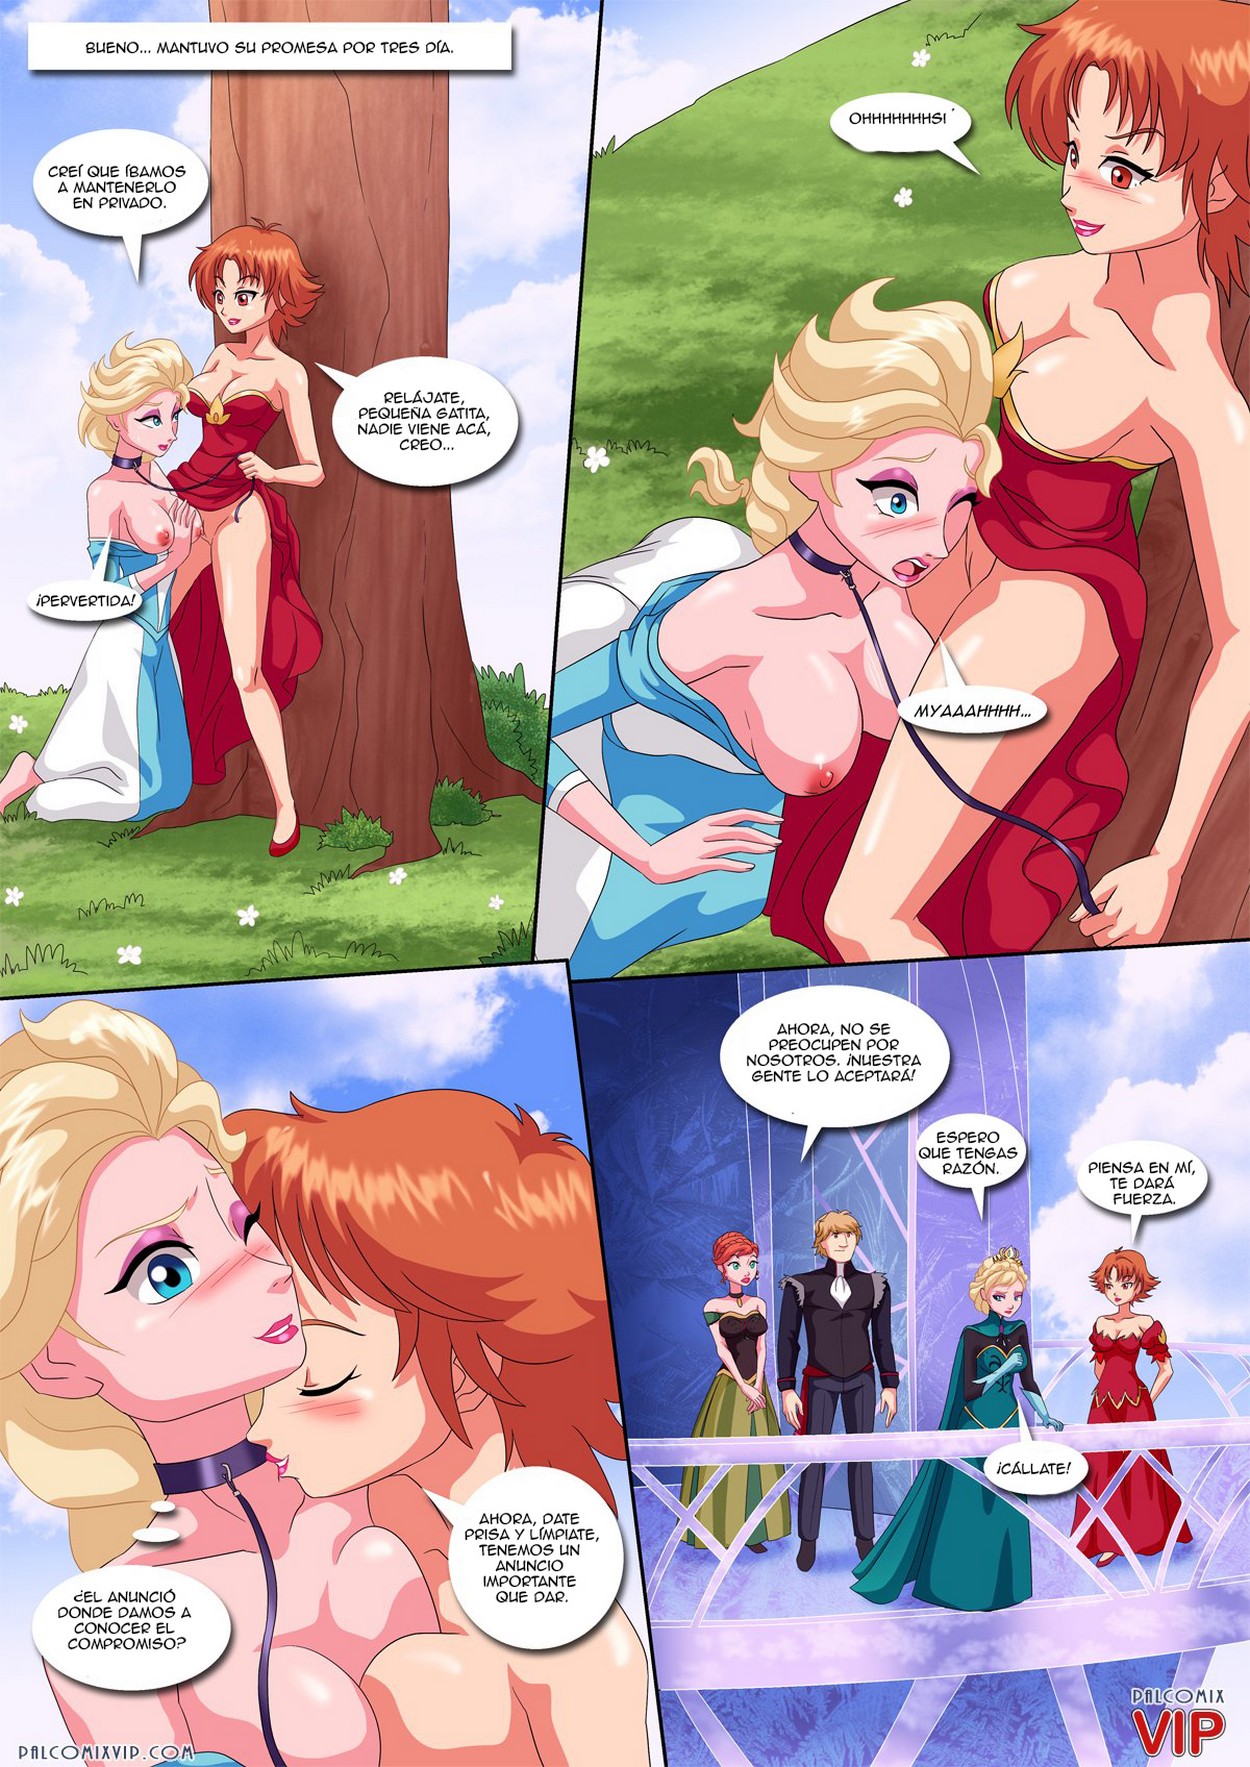 50 Shades of Frozen – Palcomix - 4d6c4f0504203370211f9cba6cac7692